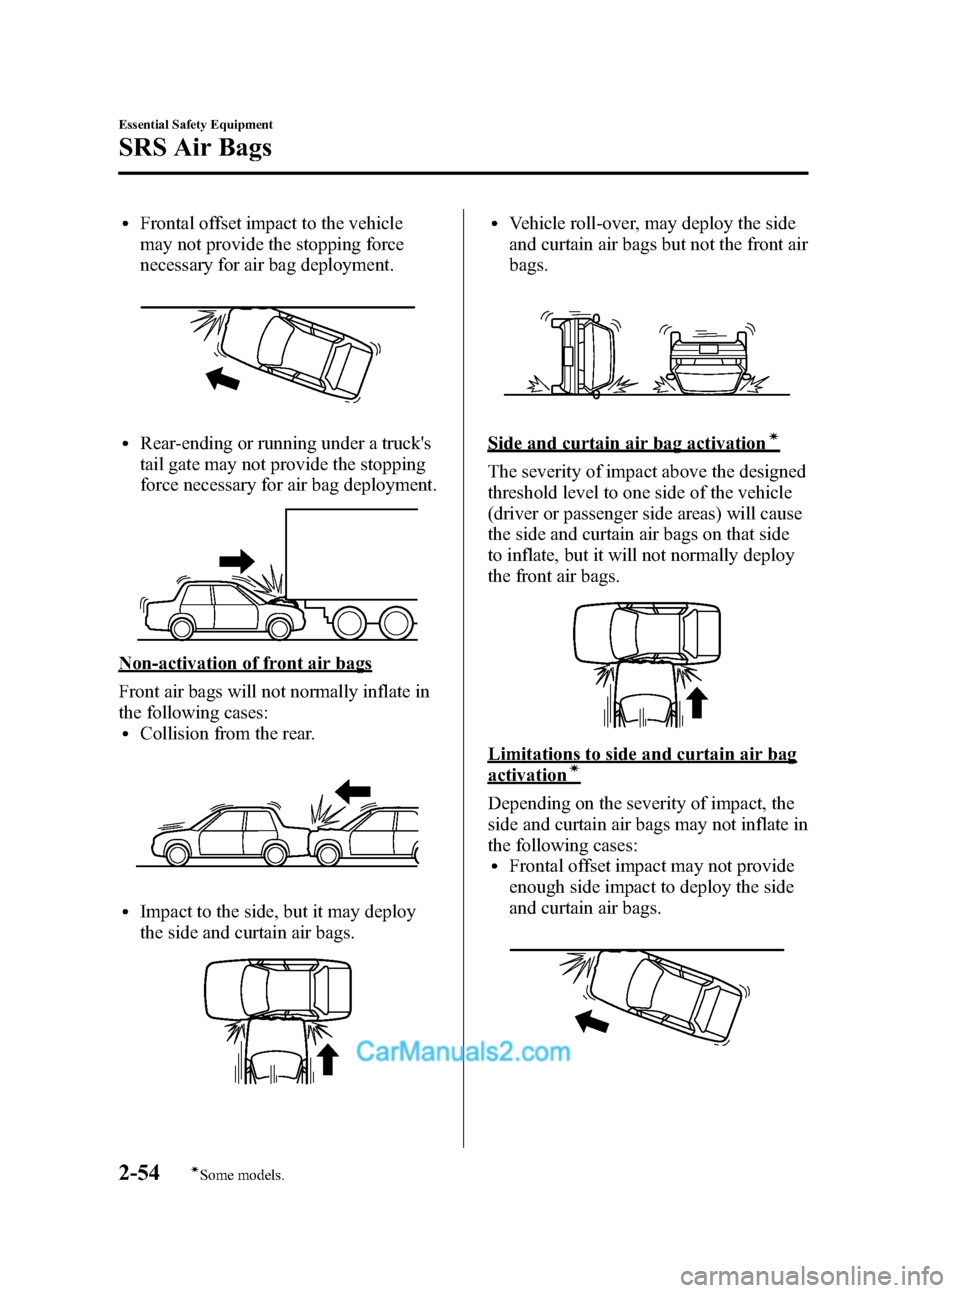 MAZDA MODEL MAZDASPEED 3 2008  Owners Manual (in English) Black plate (68,1)
lFrontal offset impact to the vehicle
may not provide the stopping force
necessary for air bag deployment.
lRear-ending or running under a trucks
tail gate may not provide the stop